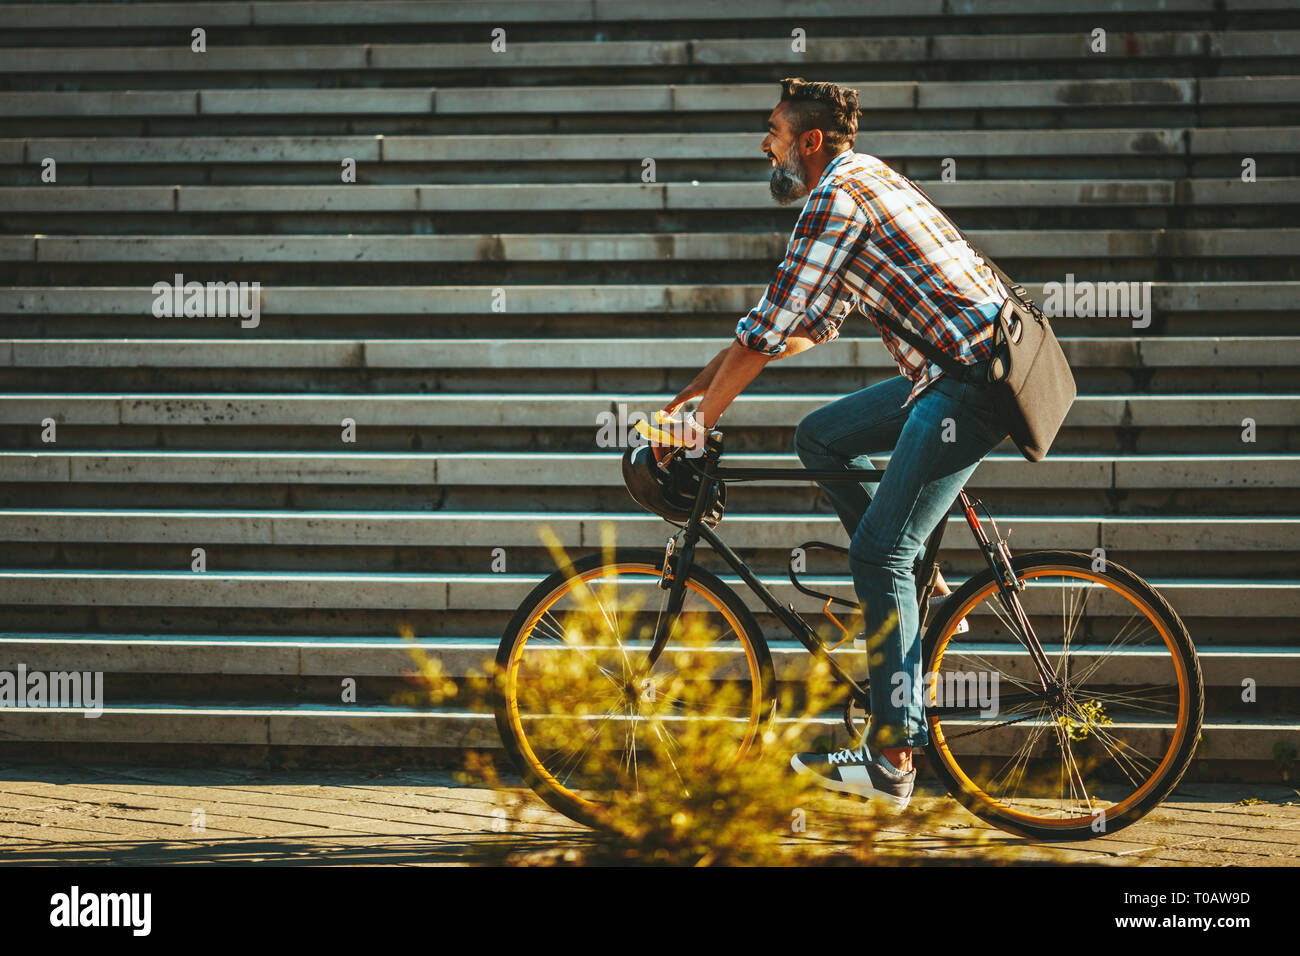 A handsome young man goes to the city with his bike. He is riding the bike, happy because of nice weather. Stock Photo